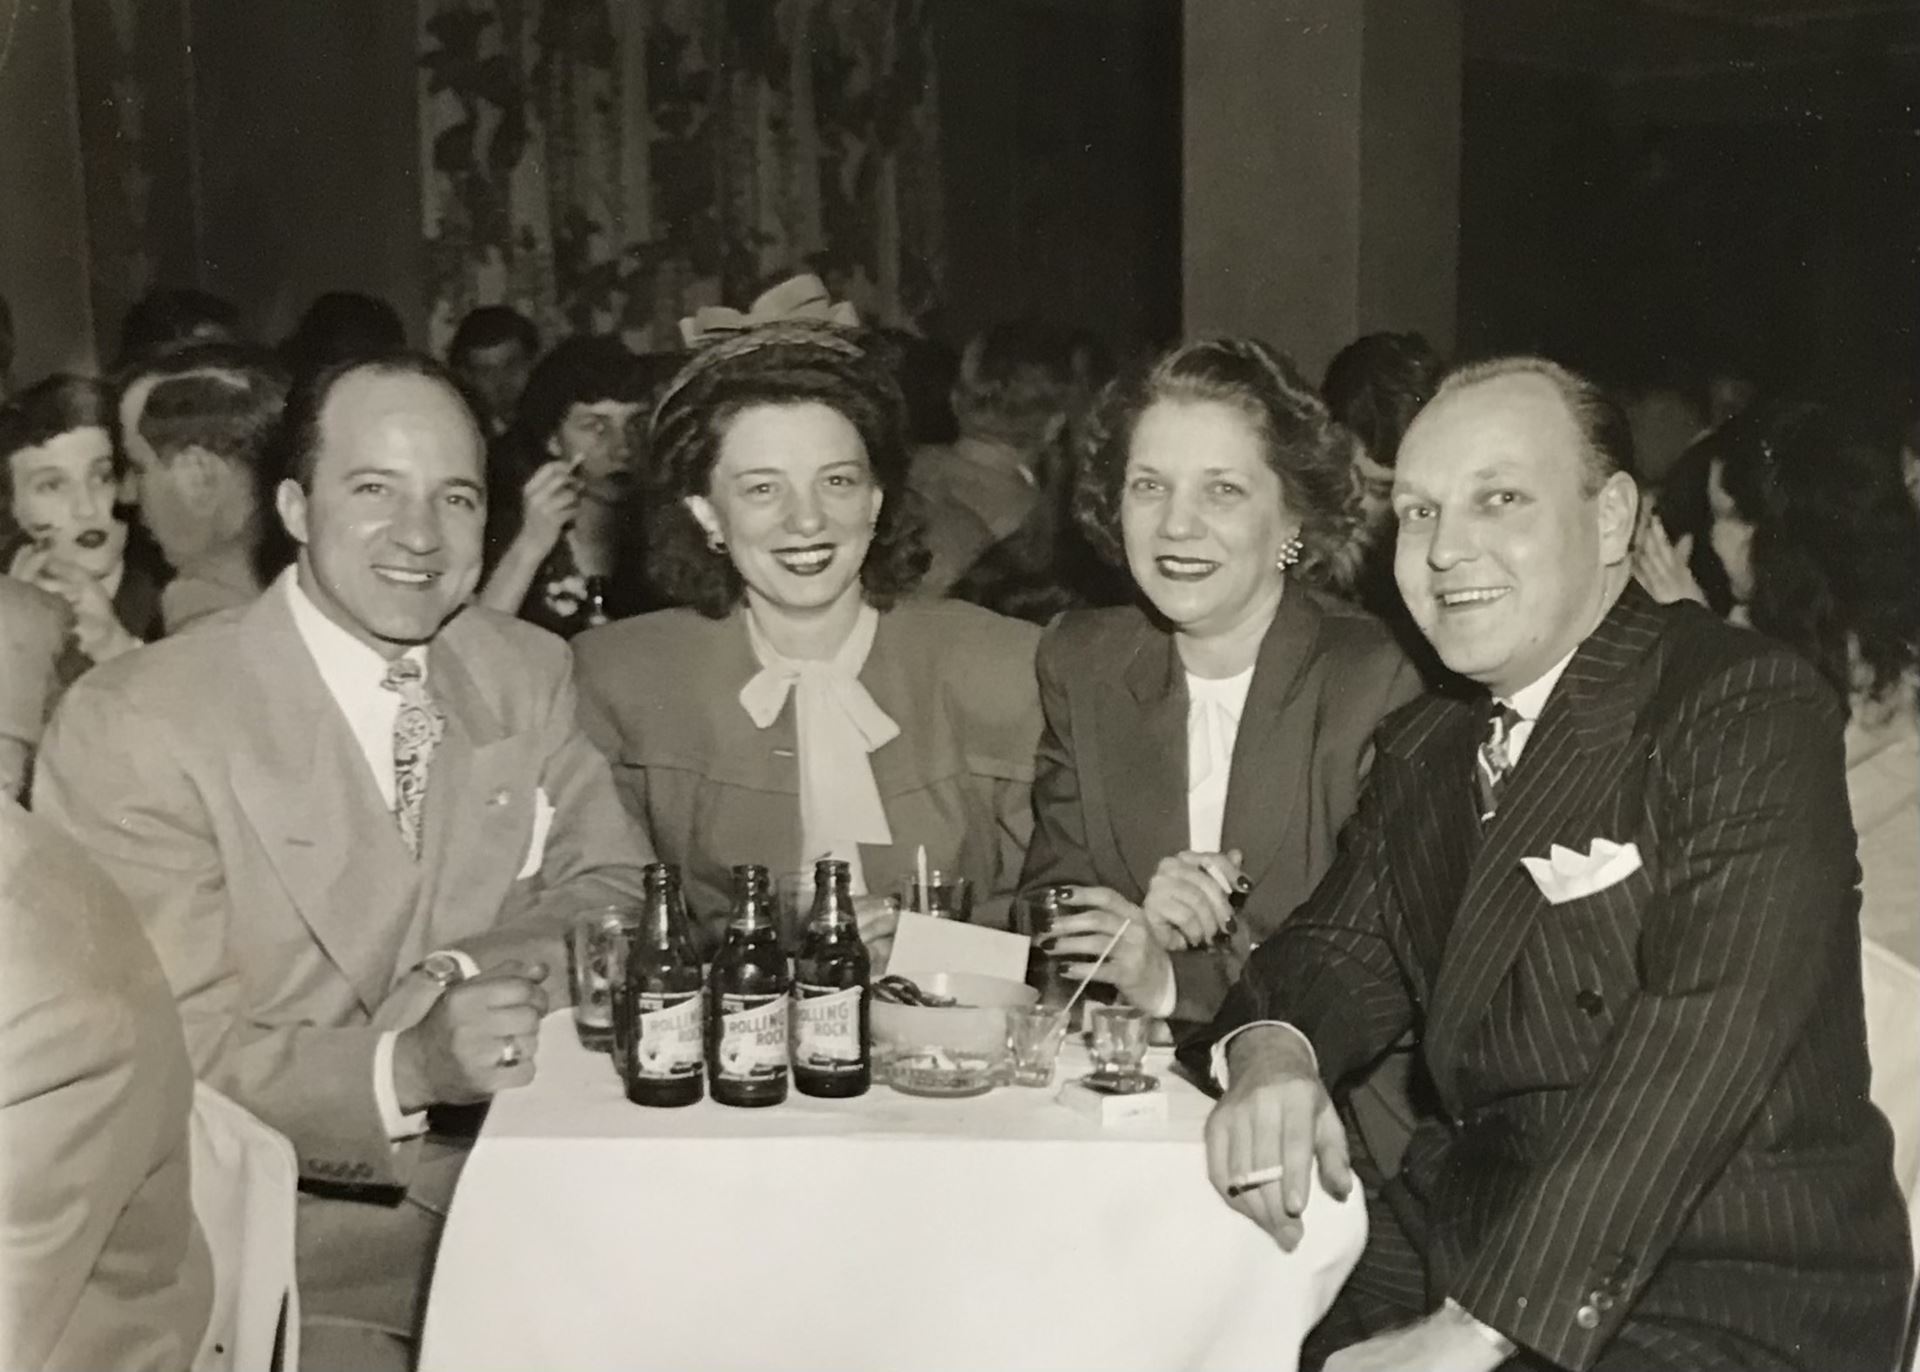 Frank Tito (far left) and family members out on the town with Rolling Rock beer bottles arrayed on a table. Photo courtesy of Rona Peckich.